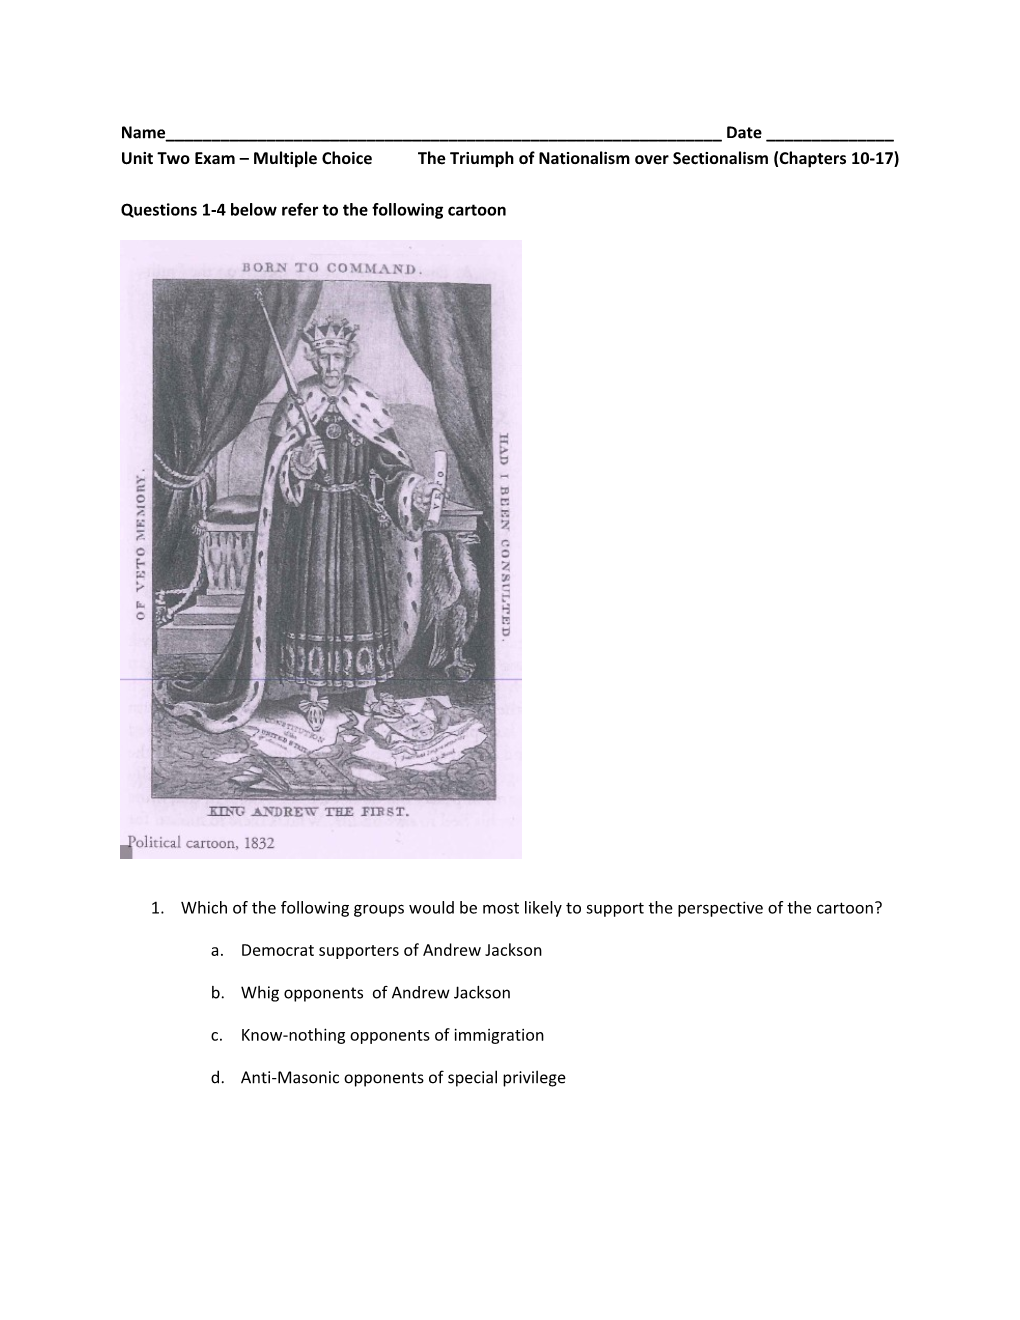 Unit Two Exam Multiple Choice the Triumph of Nationalism Over Sectionalism (Chapters 10-17)